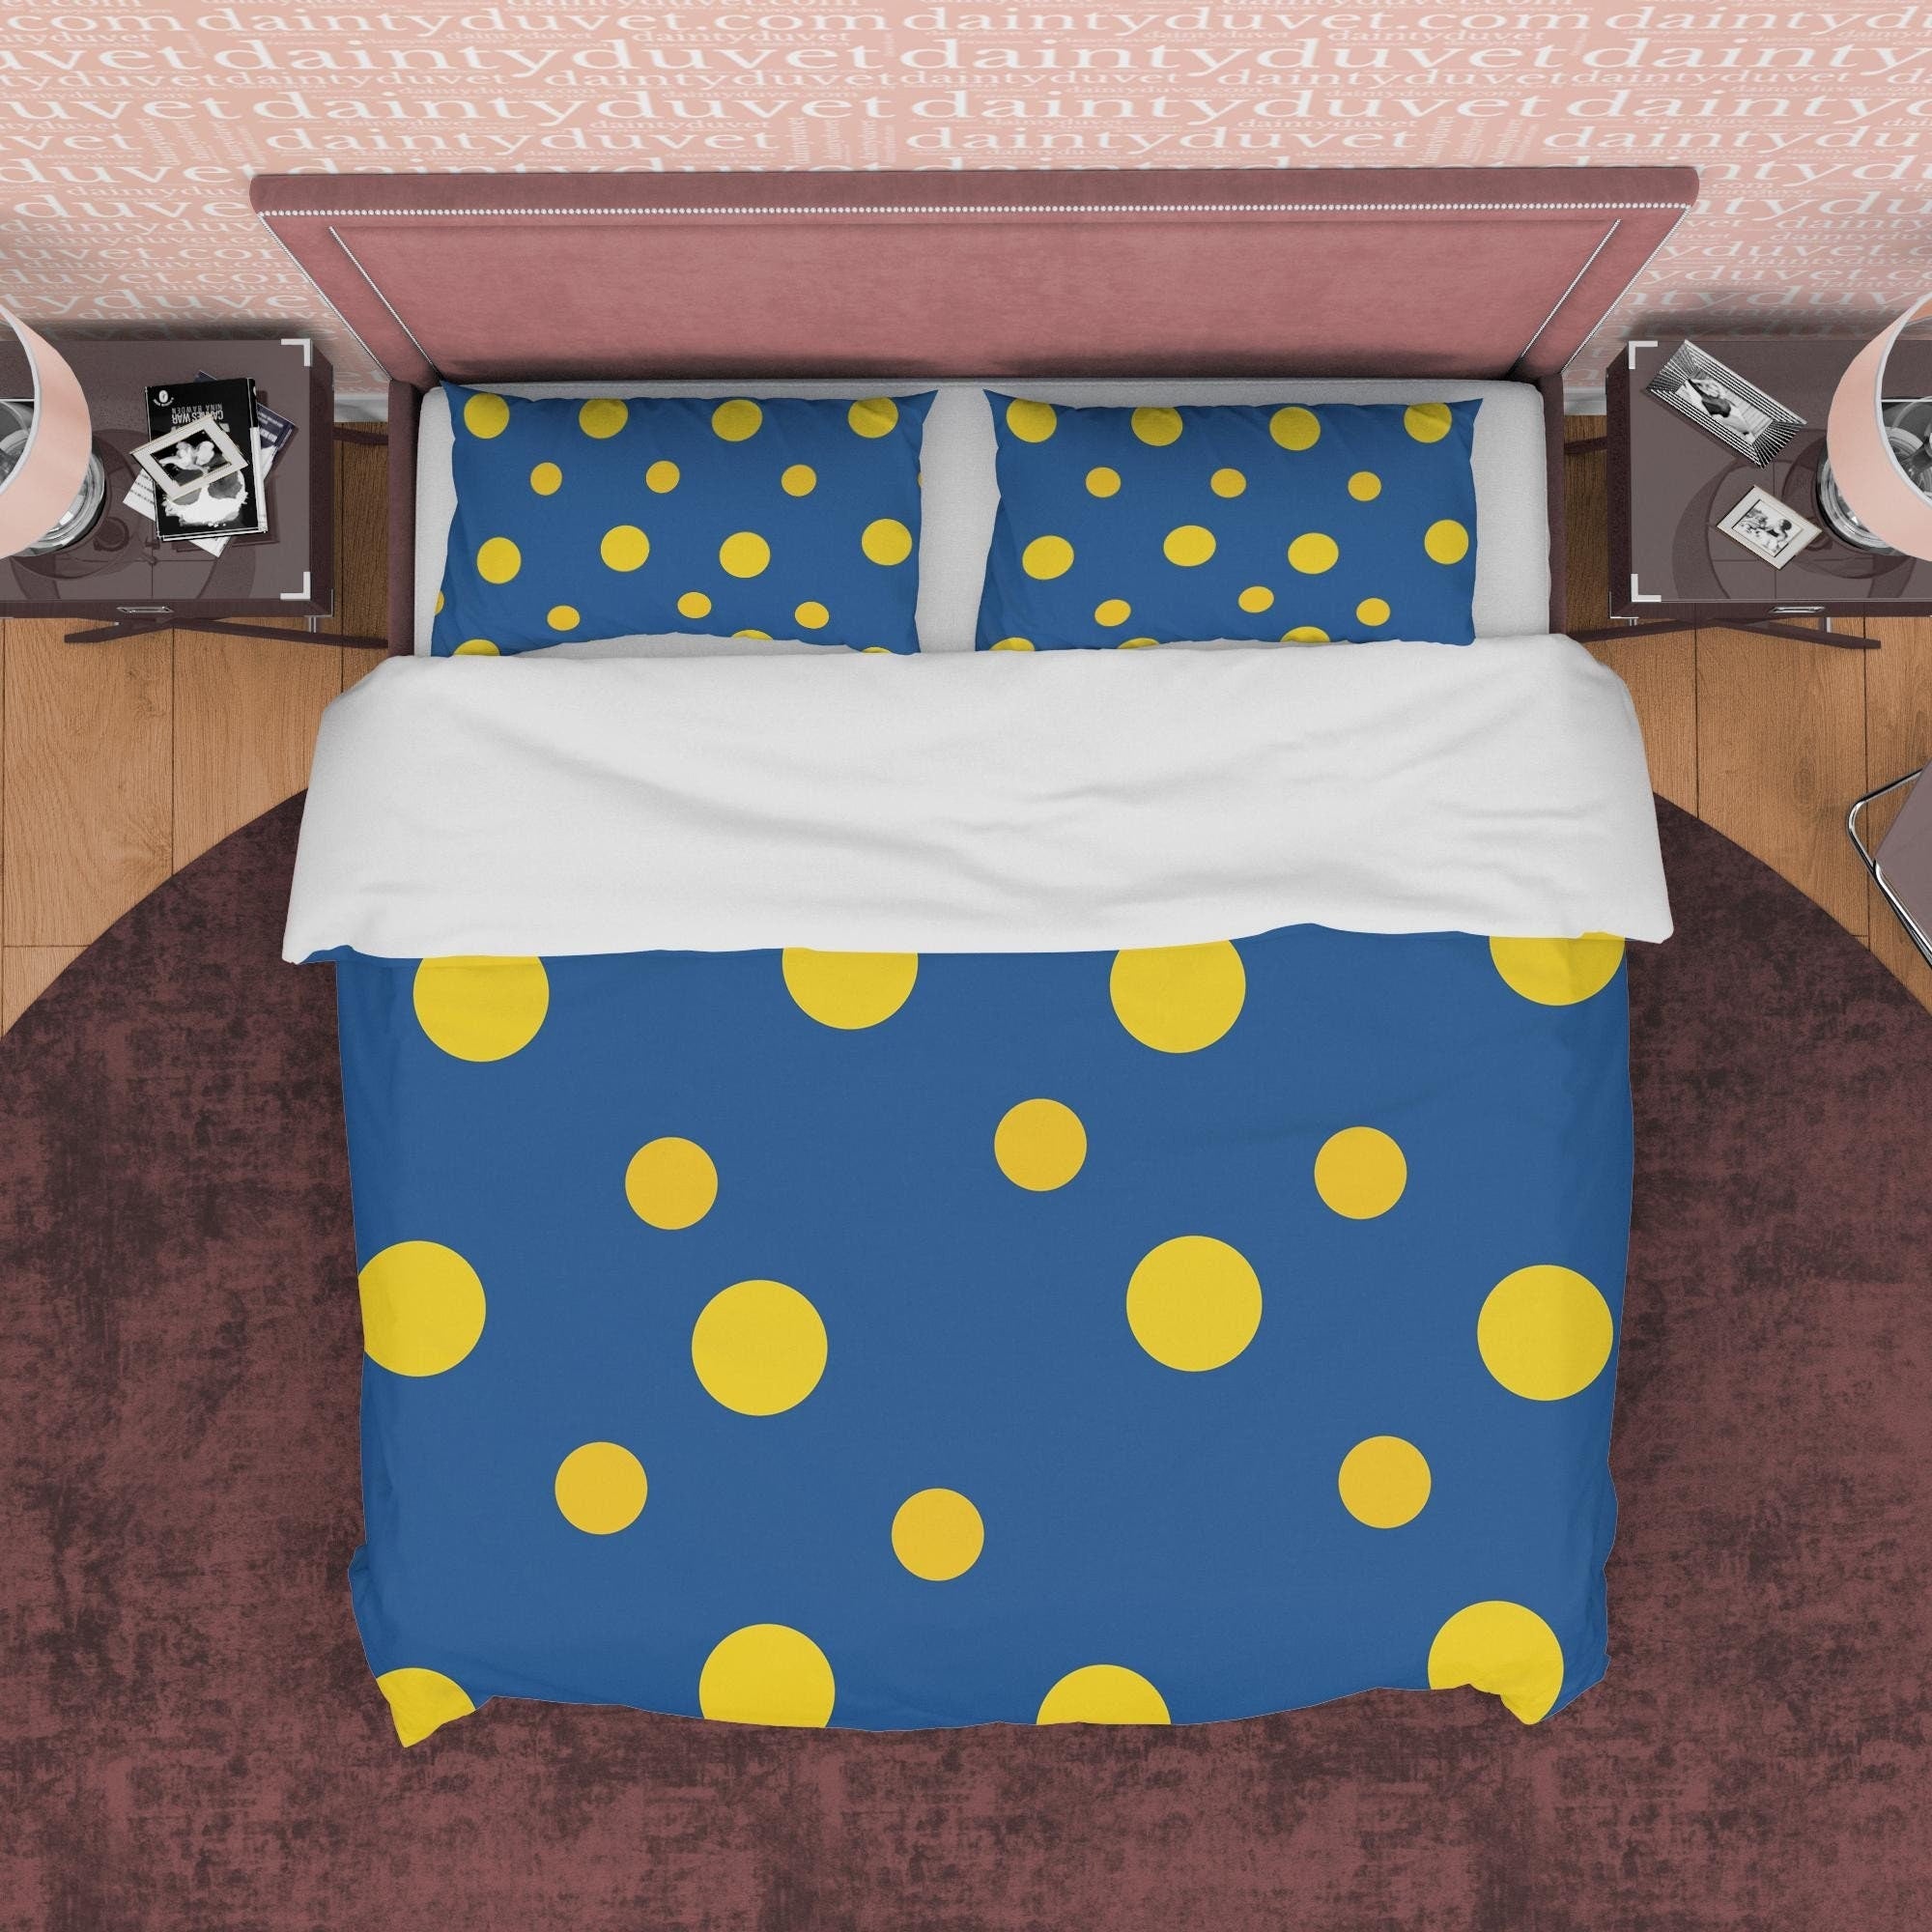 Blue Polka Dot Duvet Cover Geometric Bedding, Mid Century Modern Bedroom Set, Yellow Dotted Quilt Cover, Simple Unique Colorful Bedspread